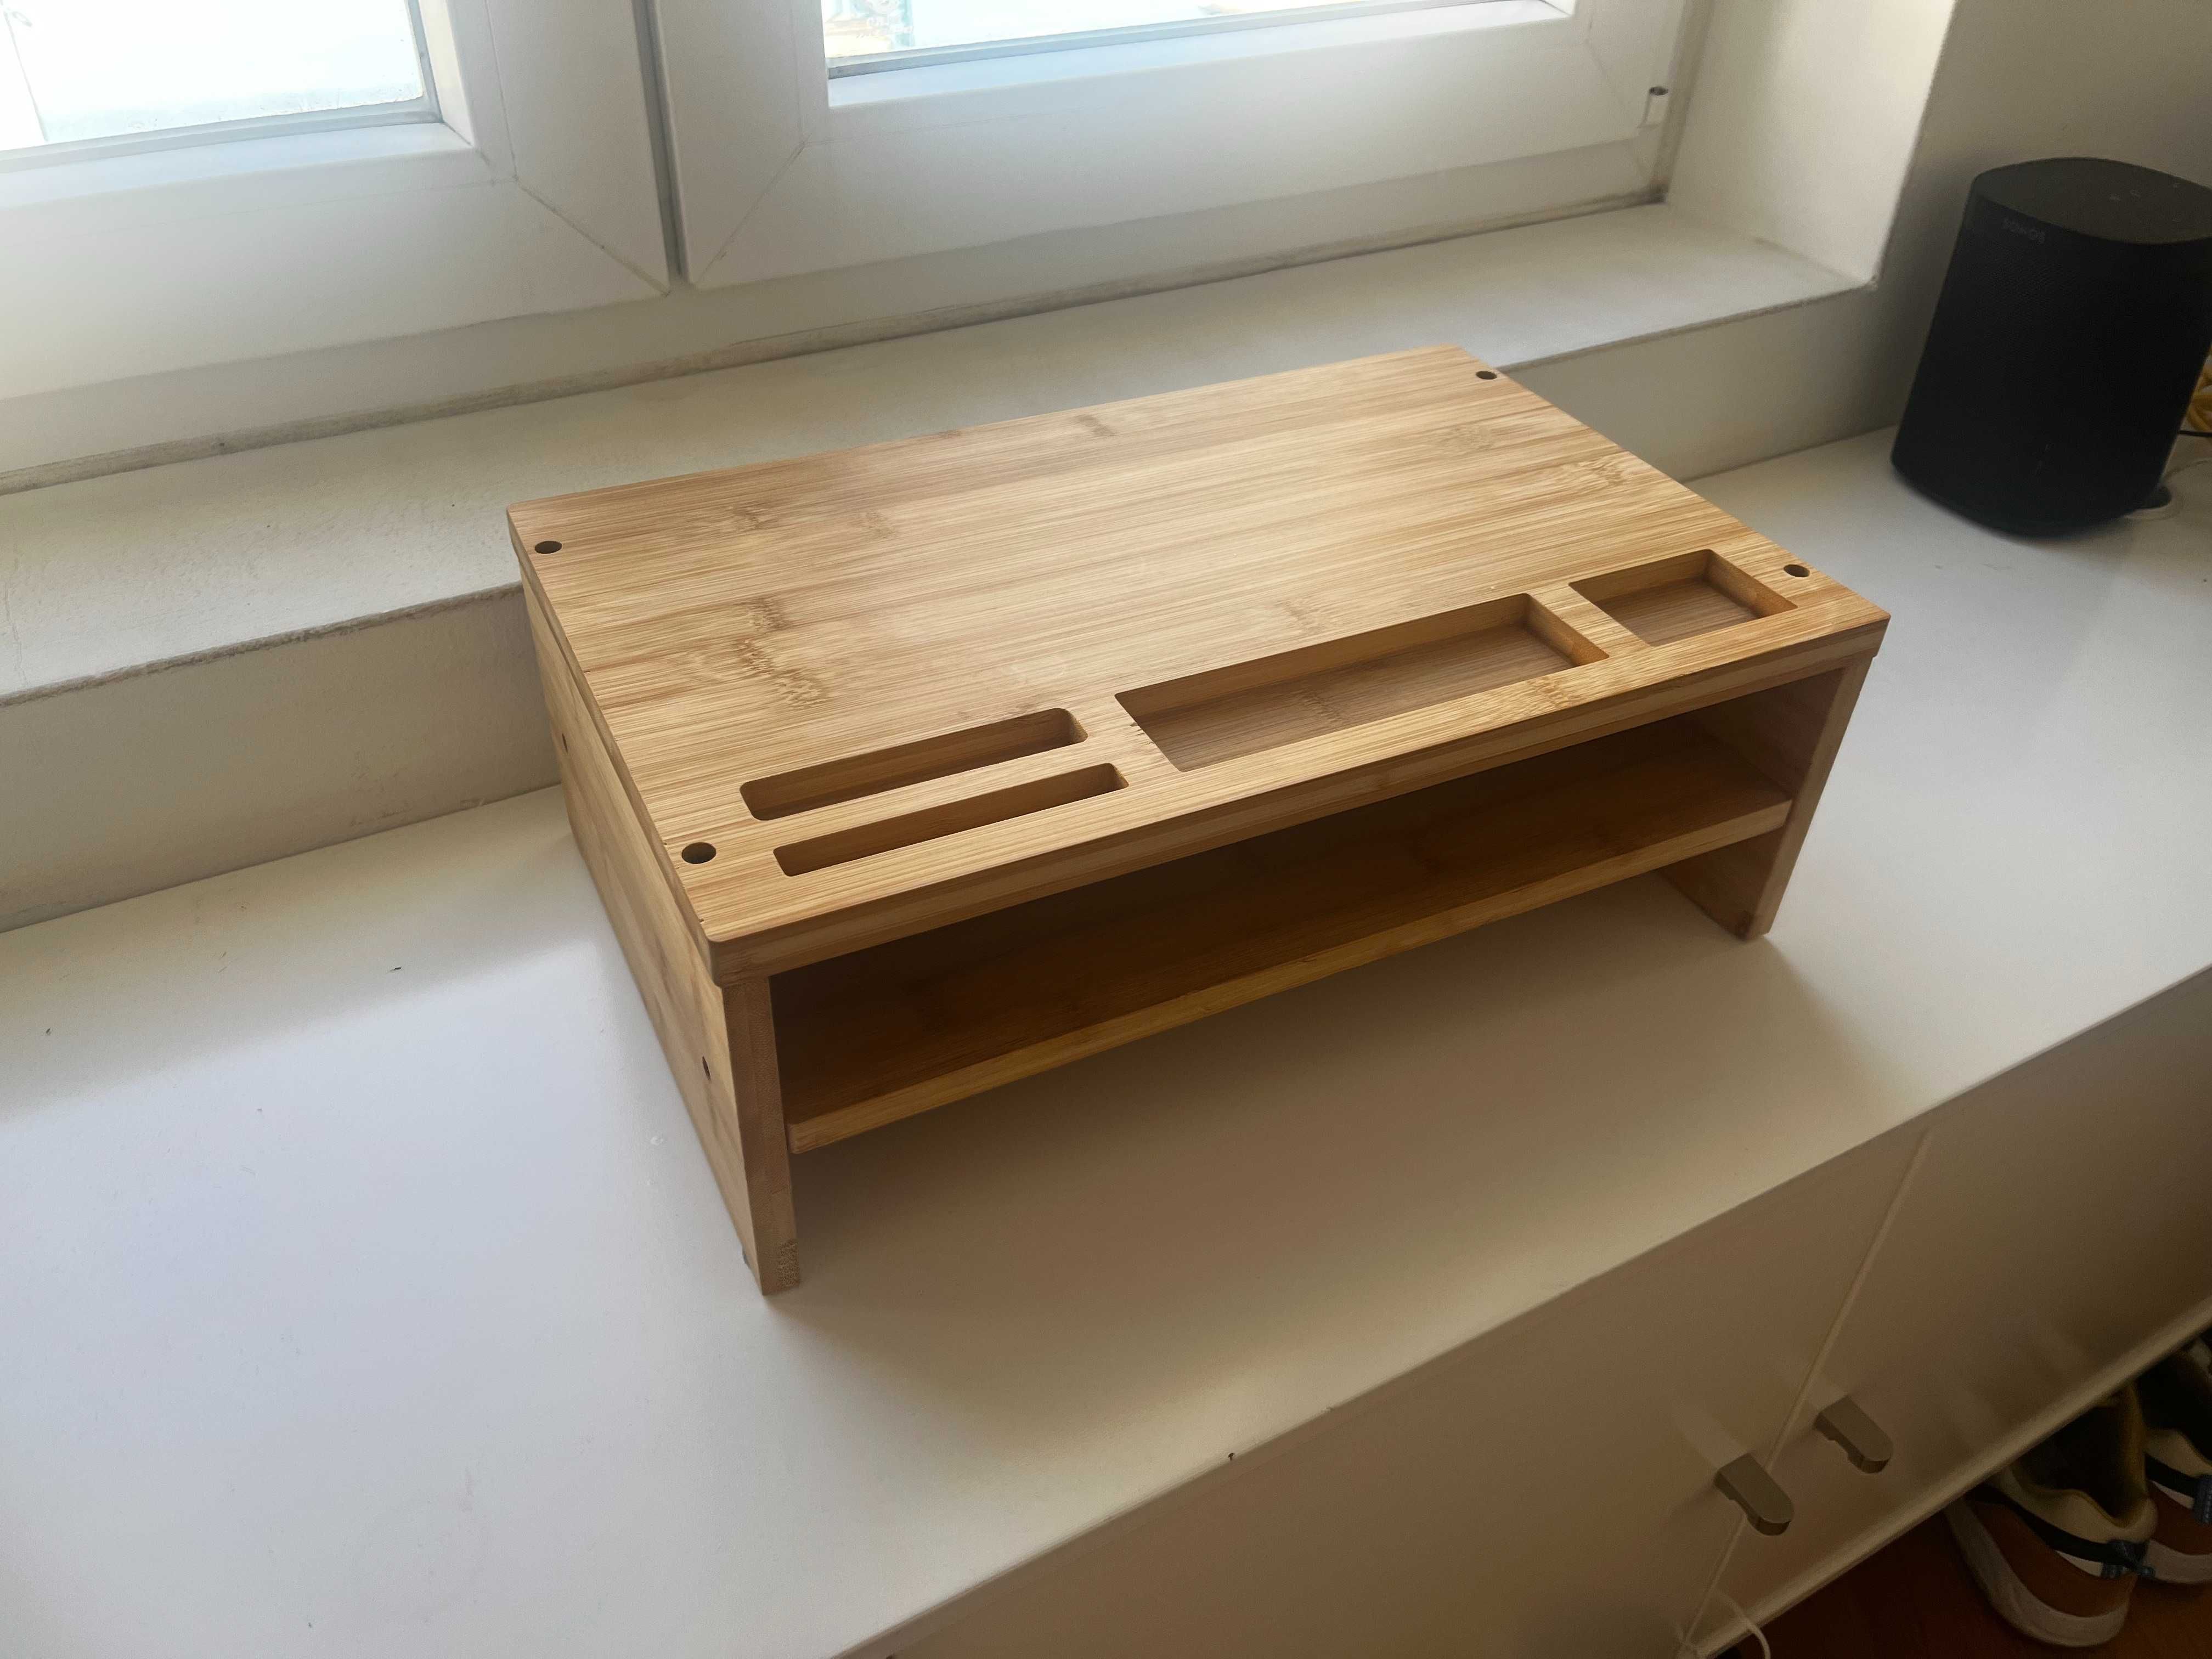 Bamboo desk organizer - support for your desktop monitor